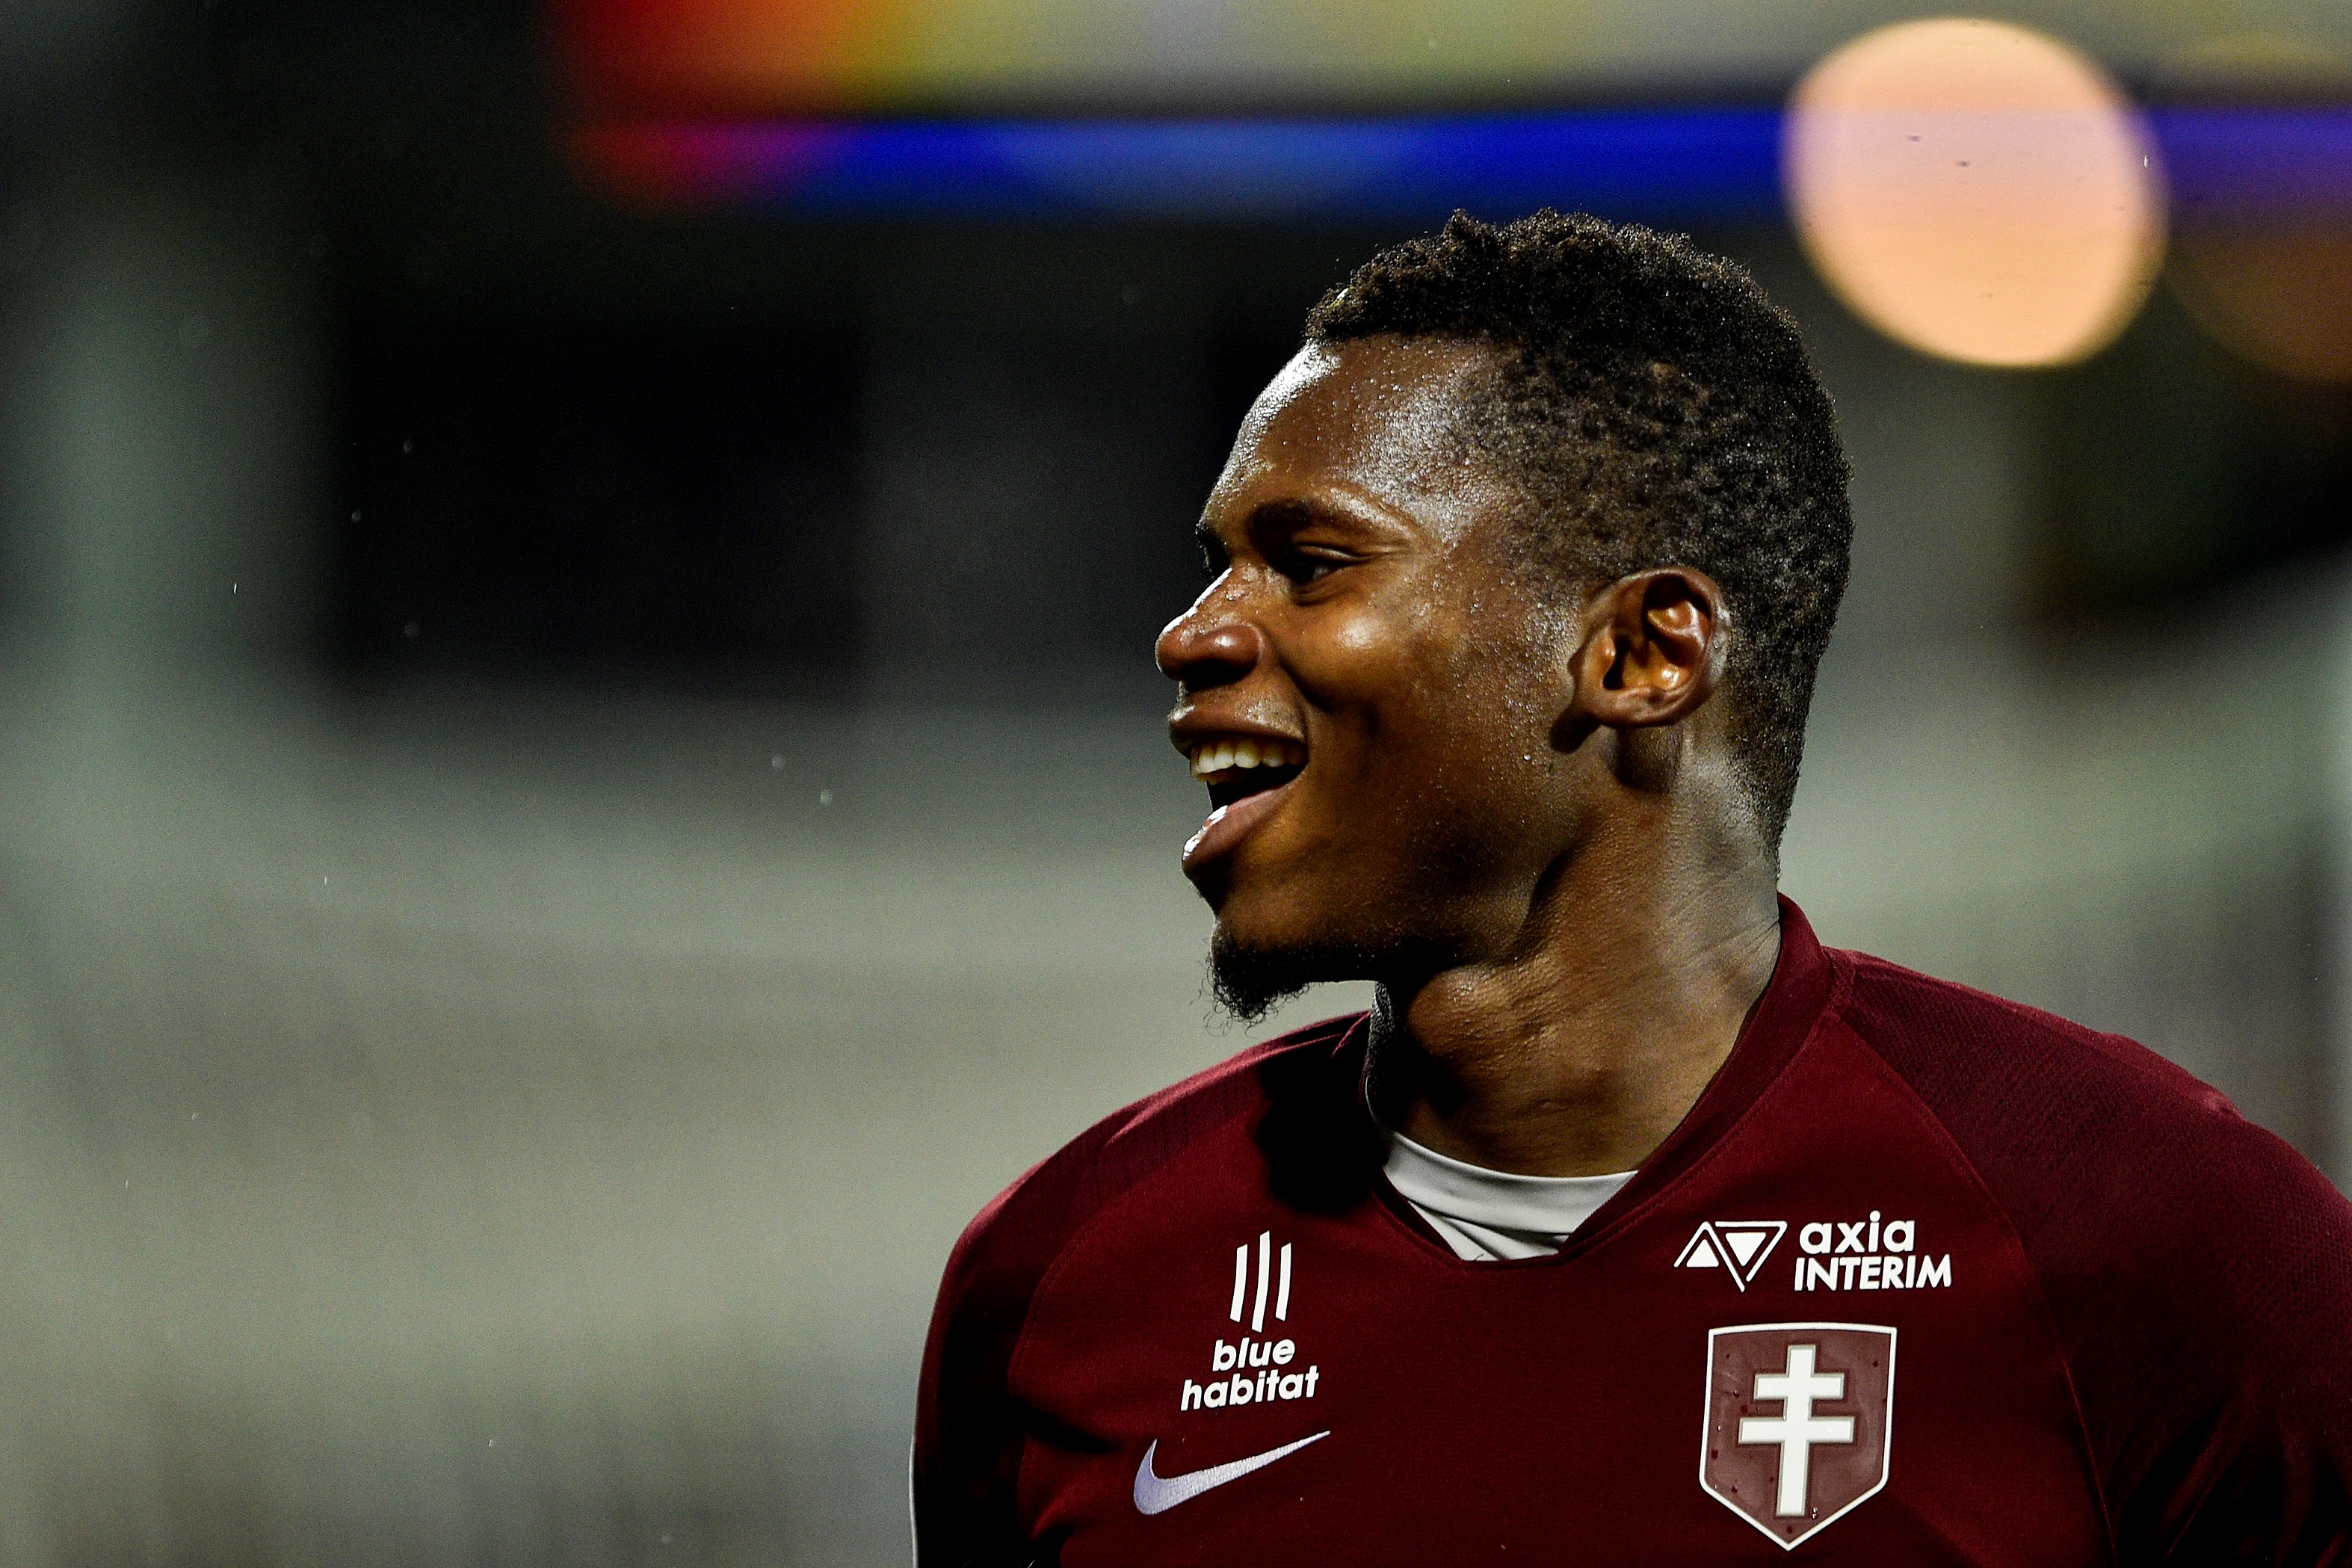 Metz' Senegalese forward Habib Diallo (C) celebrates after scoring during the French L1 football match between Metz (FCM) and Nantes (FCN) at Saint Symphorien stadium in Longeville-les-Metz, eastern France, on October 19, 2019. (Photo by JEAN-CHRISTOPHE VERHAEGEN / AFP) (Photo by JEAN-CHRISTOPHE VERHAEGEN/AFP via Getty Images)